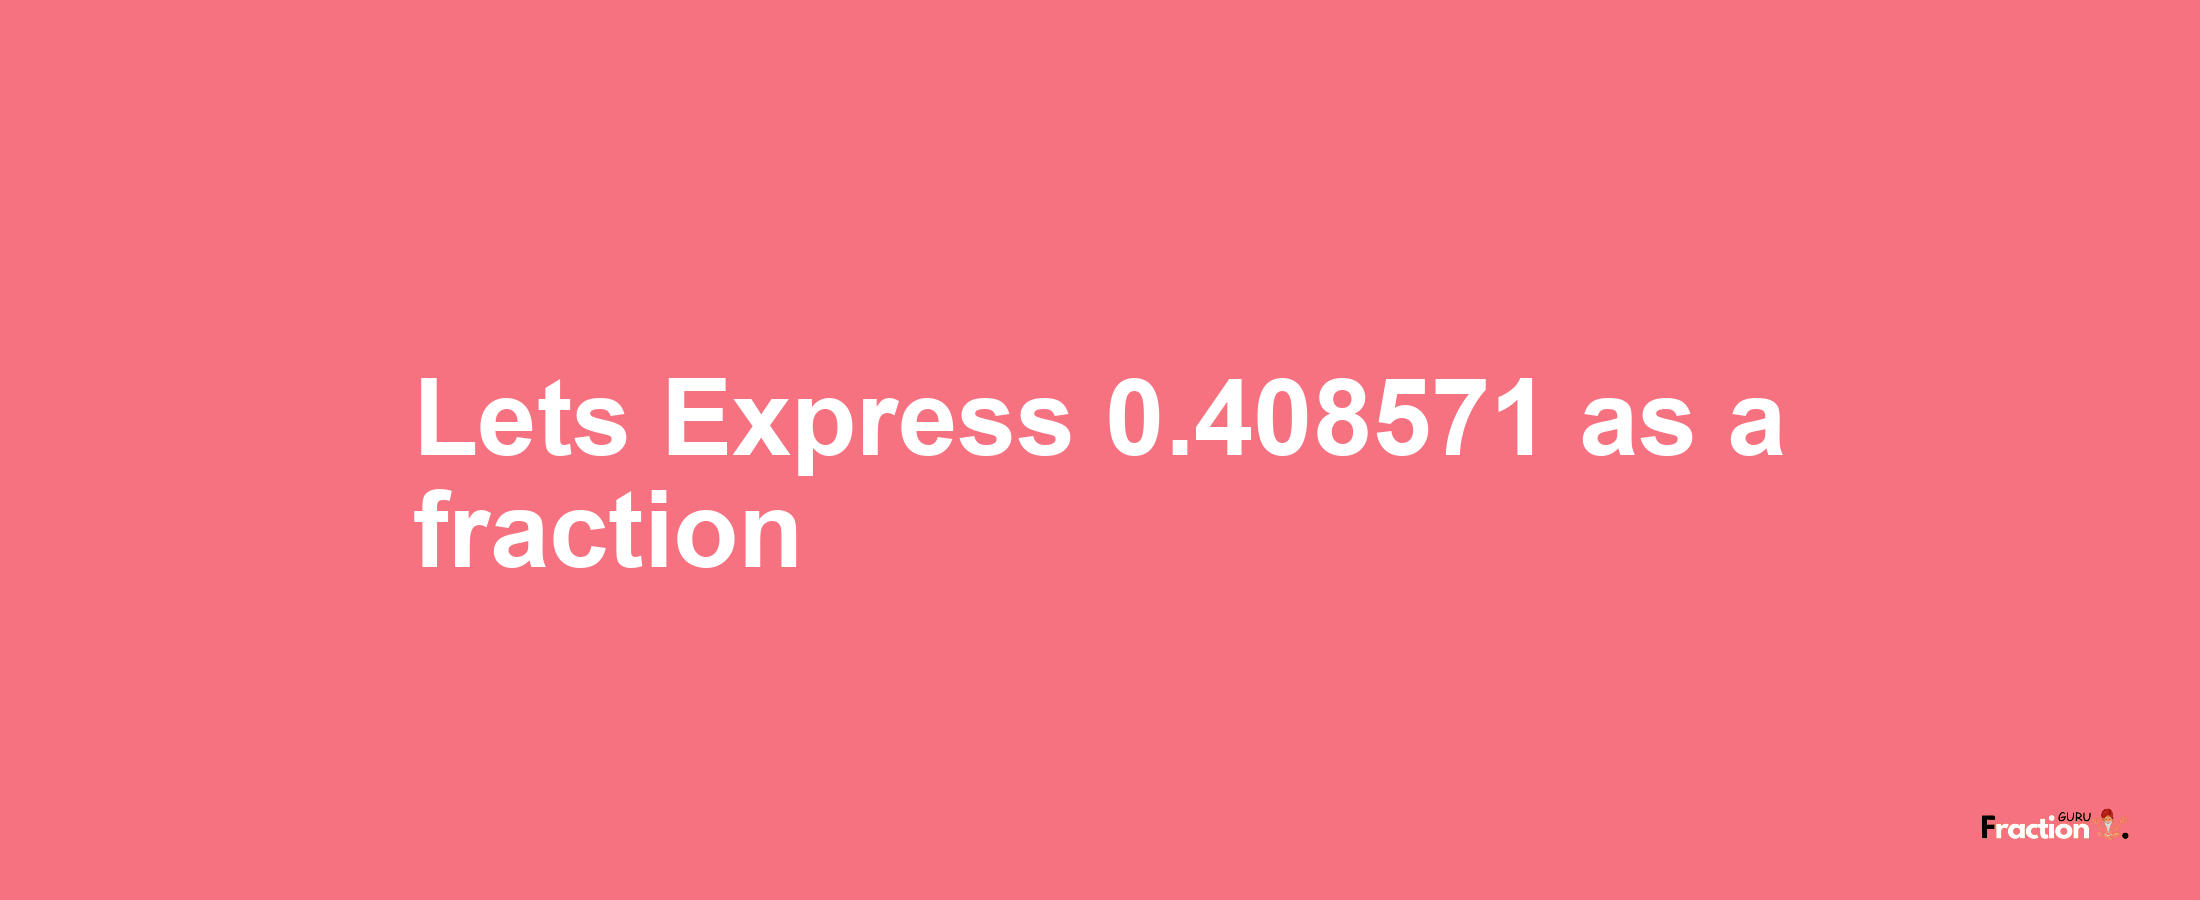 Lets Express 0.408571 as afraction